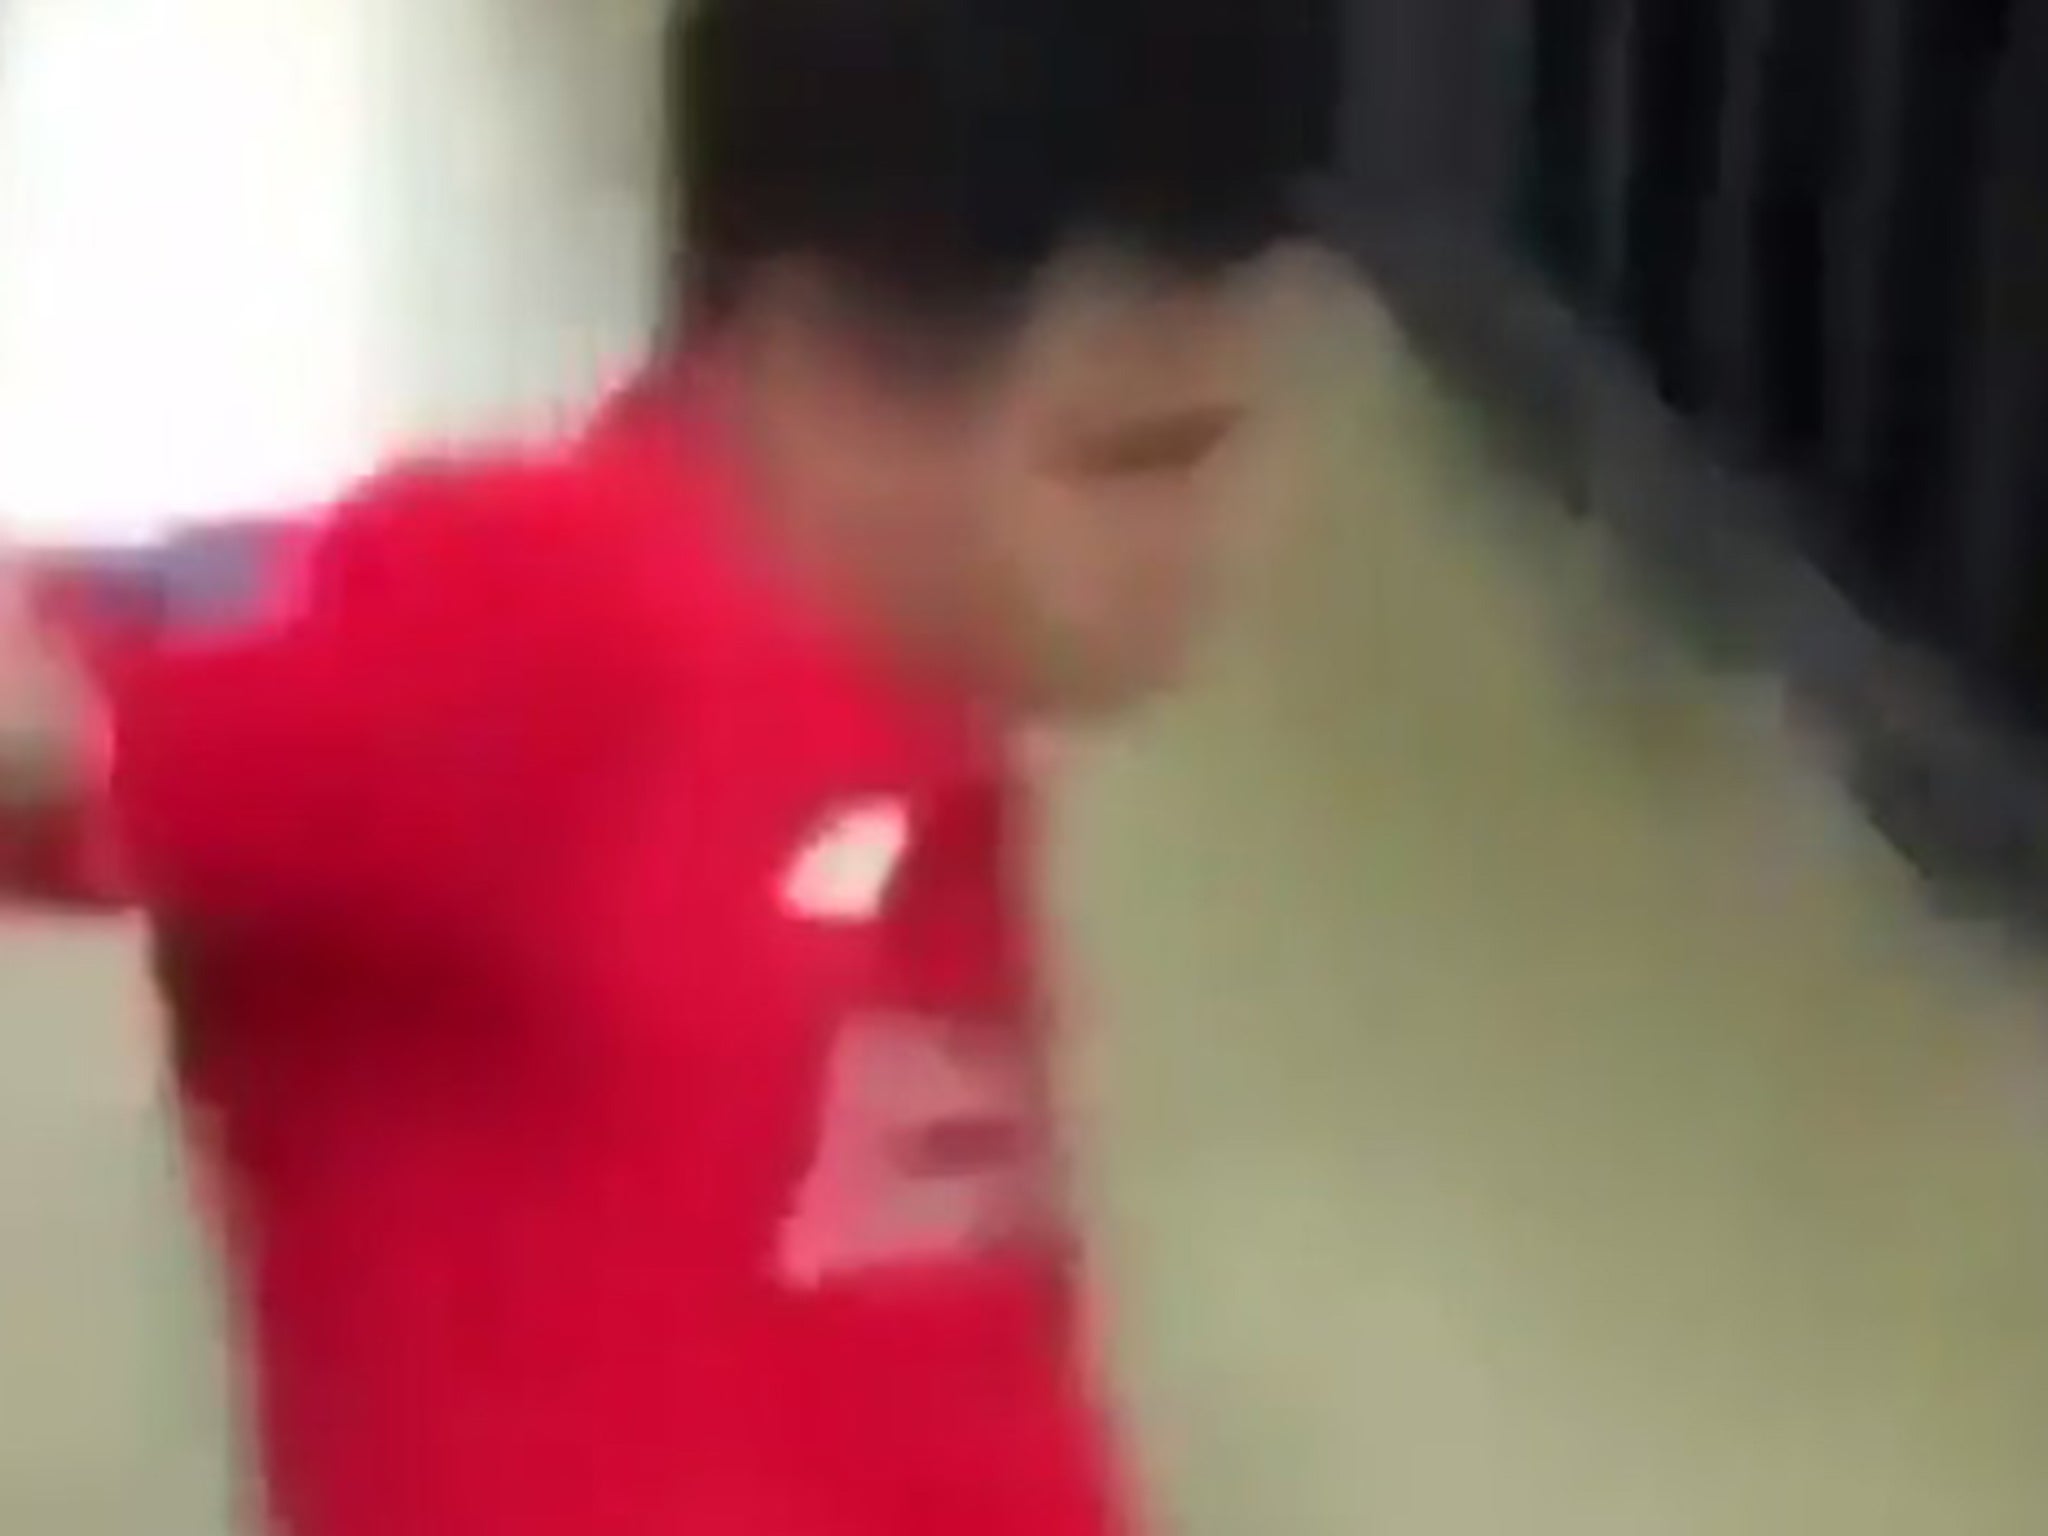 Footage shows Philippe Coutinho taking a fall